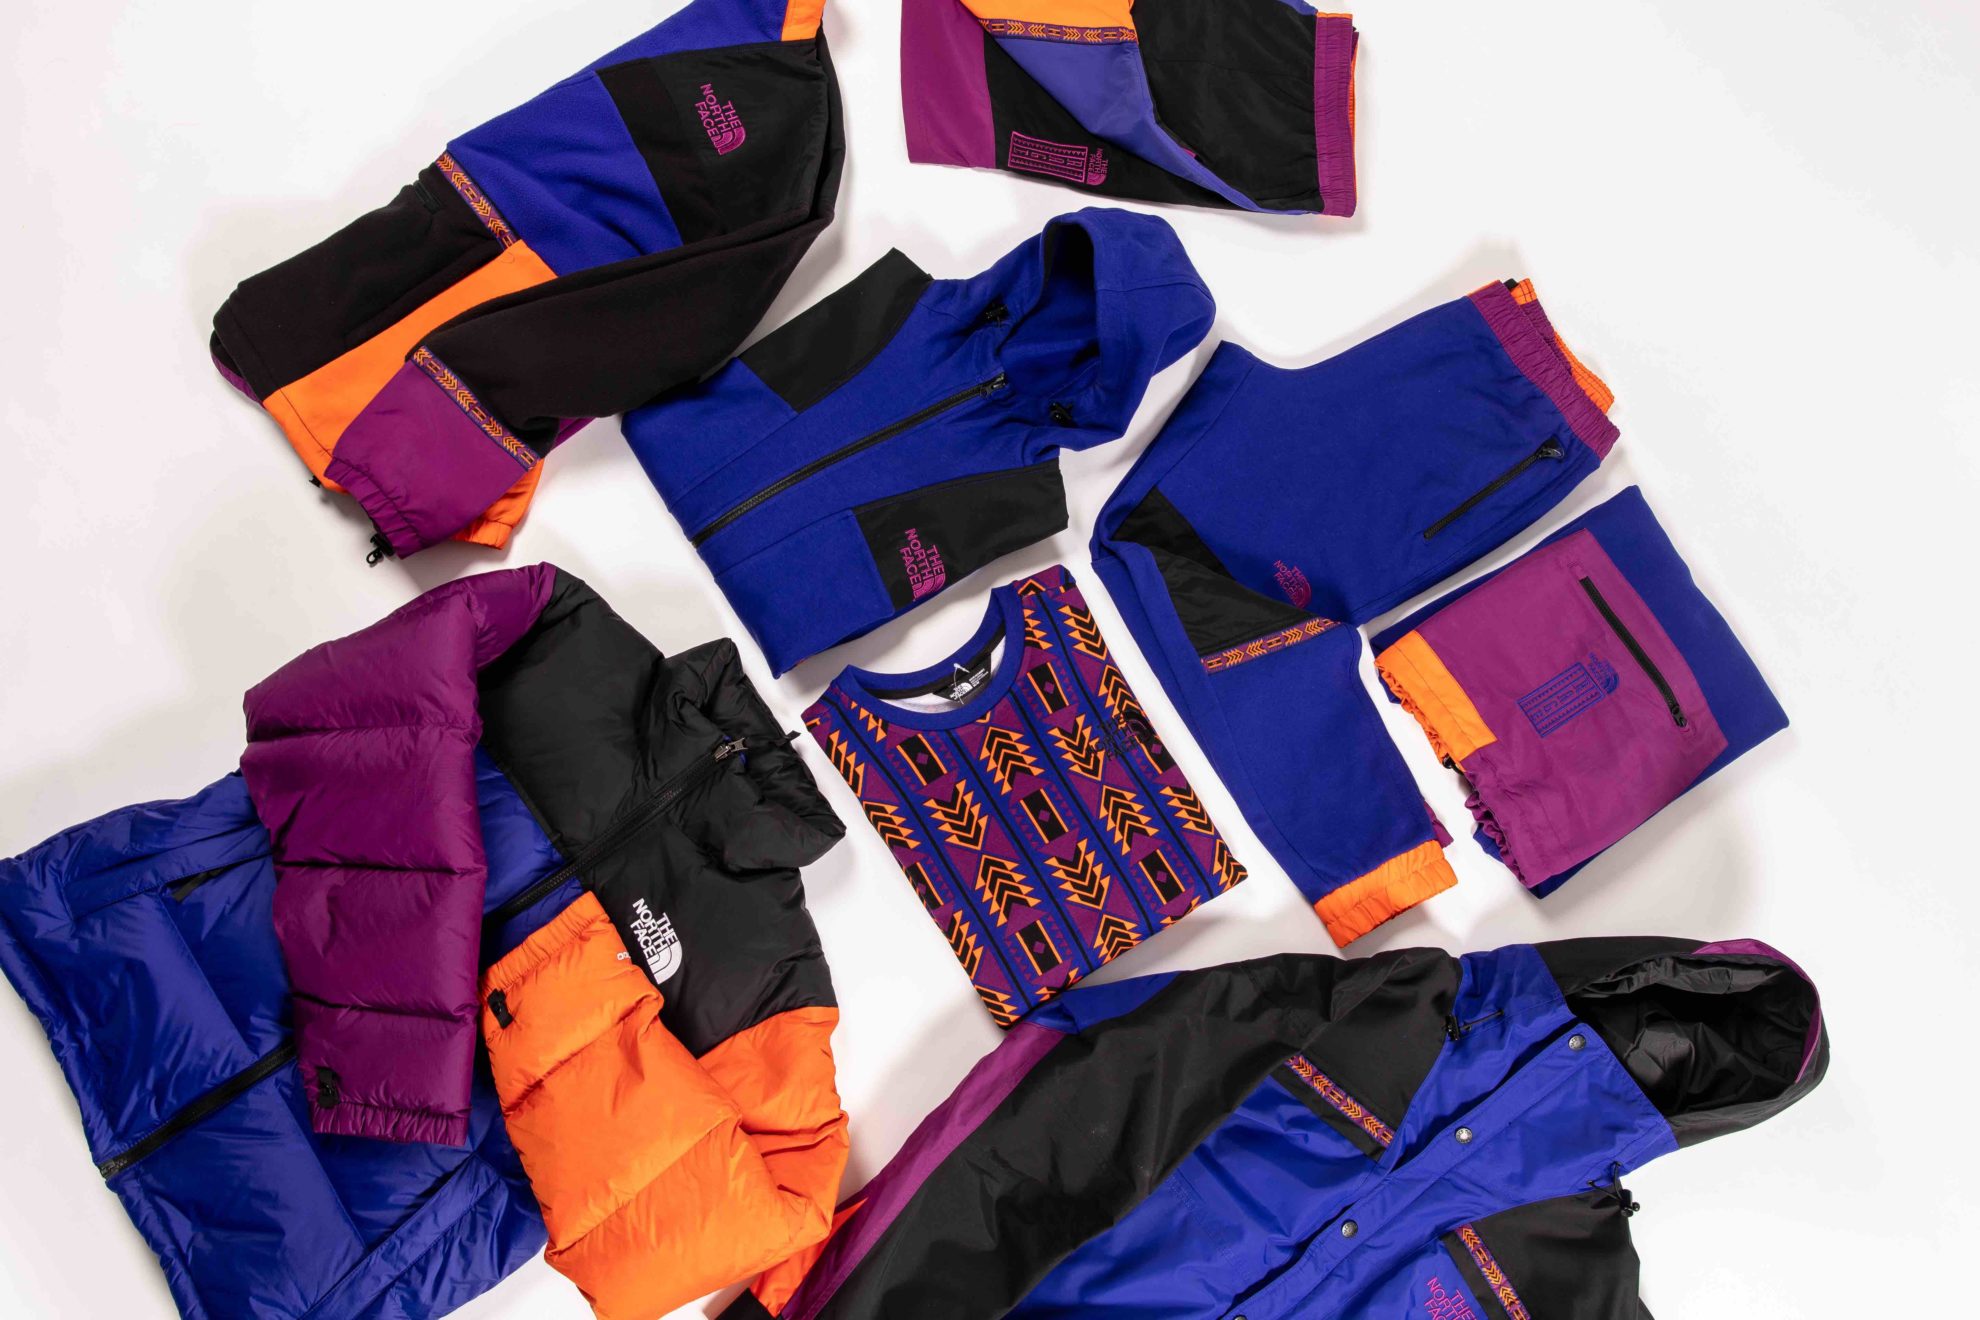 Deuk leerling Industrieel Go Nostalgic with 92 Rage Collection from The North Face • Centreville